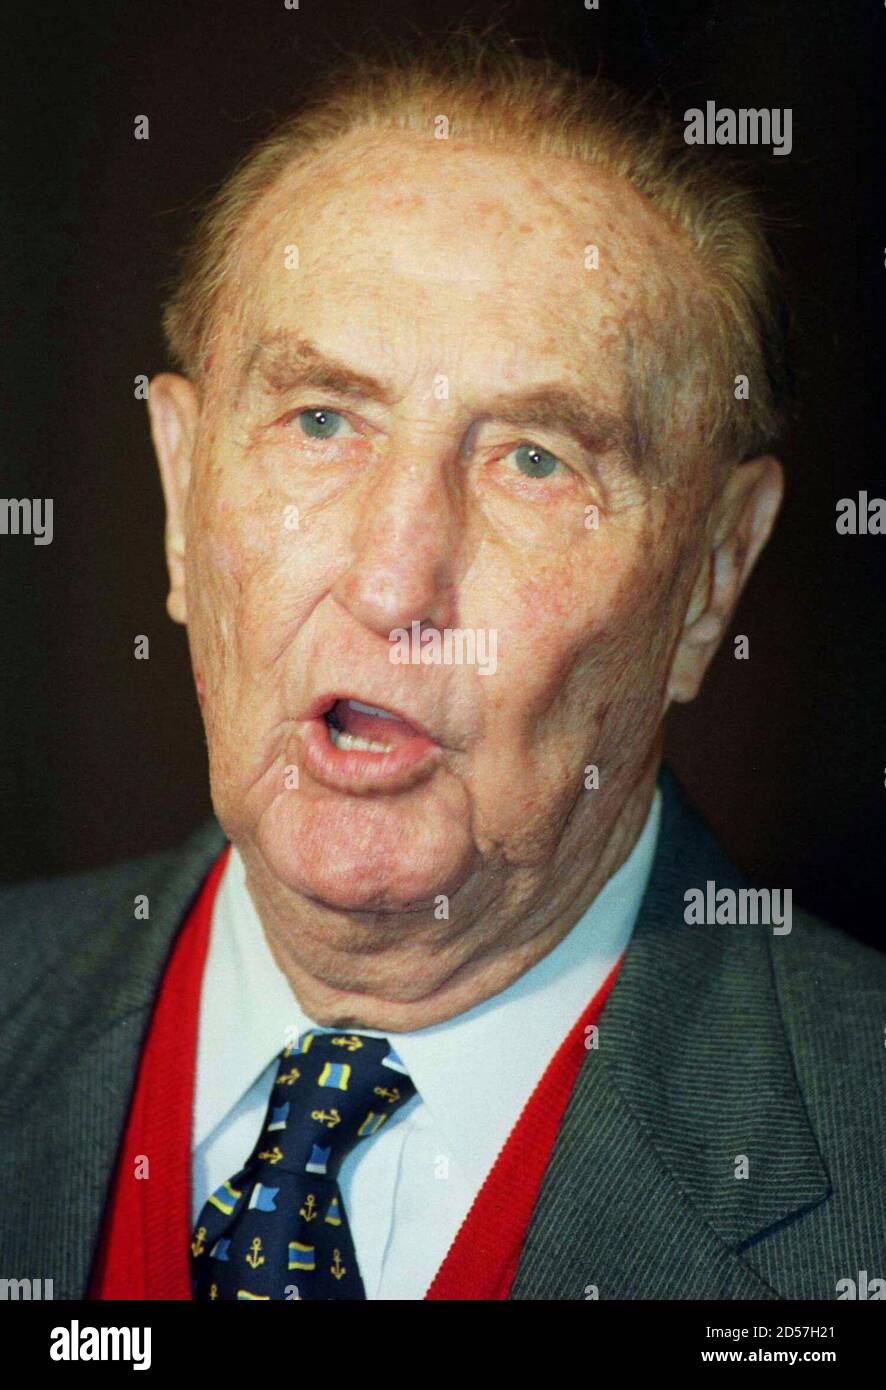 A 78-year-old mixed-race woman plans to reveal that she is the illegitimate daughter of the late U.S. Sen. Strom Thurmond (R-SC), once the nation's leading segregationist, the Washington Post reported on December 13, 2003 on its Web site. Thurmond is shown in a February 11, 1997 file photo, speaking to reporters. REUTERS/Mike Theiler/File  HB/HK Stock Photo